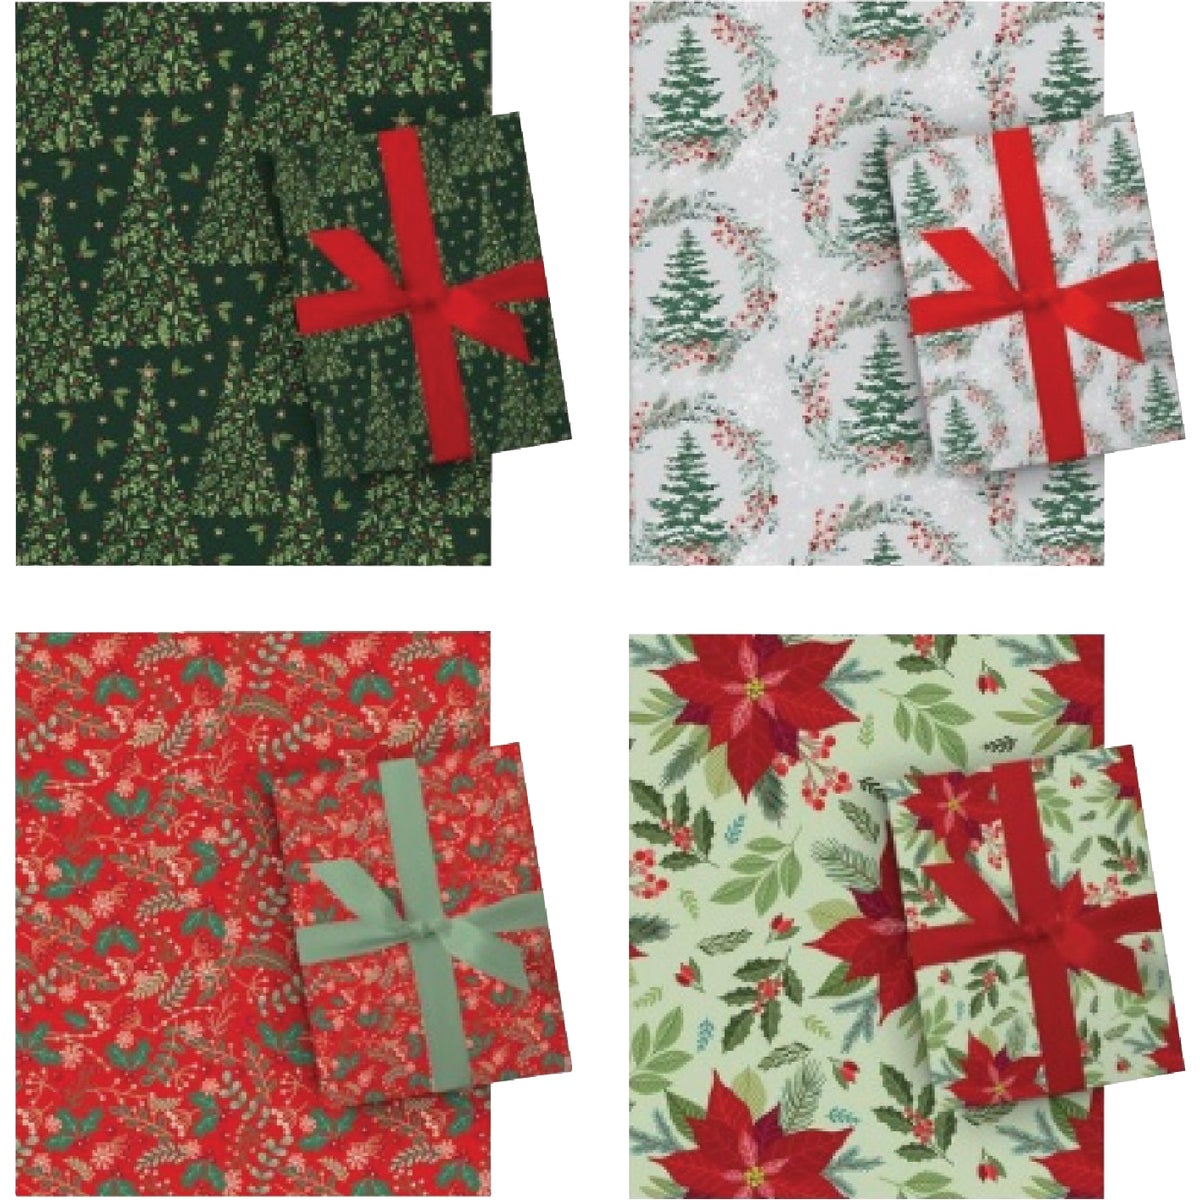 Paper Images CW3530A13 Paper Images Traditional 30 In. Christmas Gift Wrapping Paper CW3530A13 Pack of 48